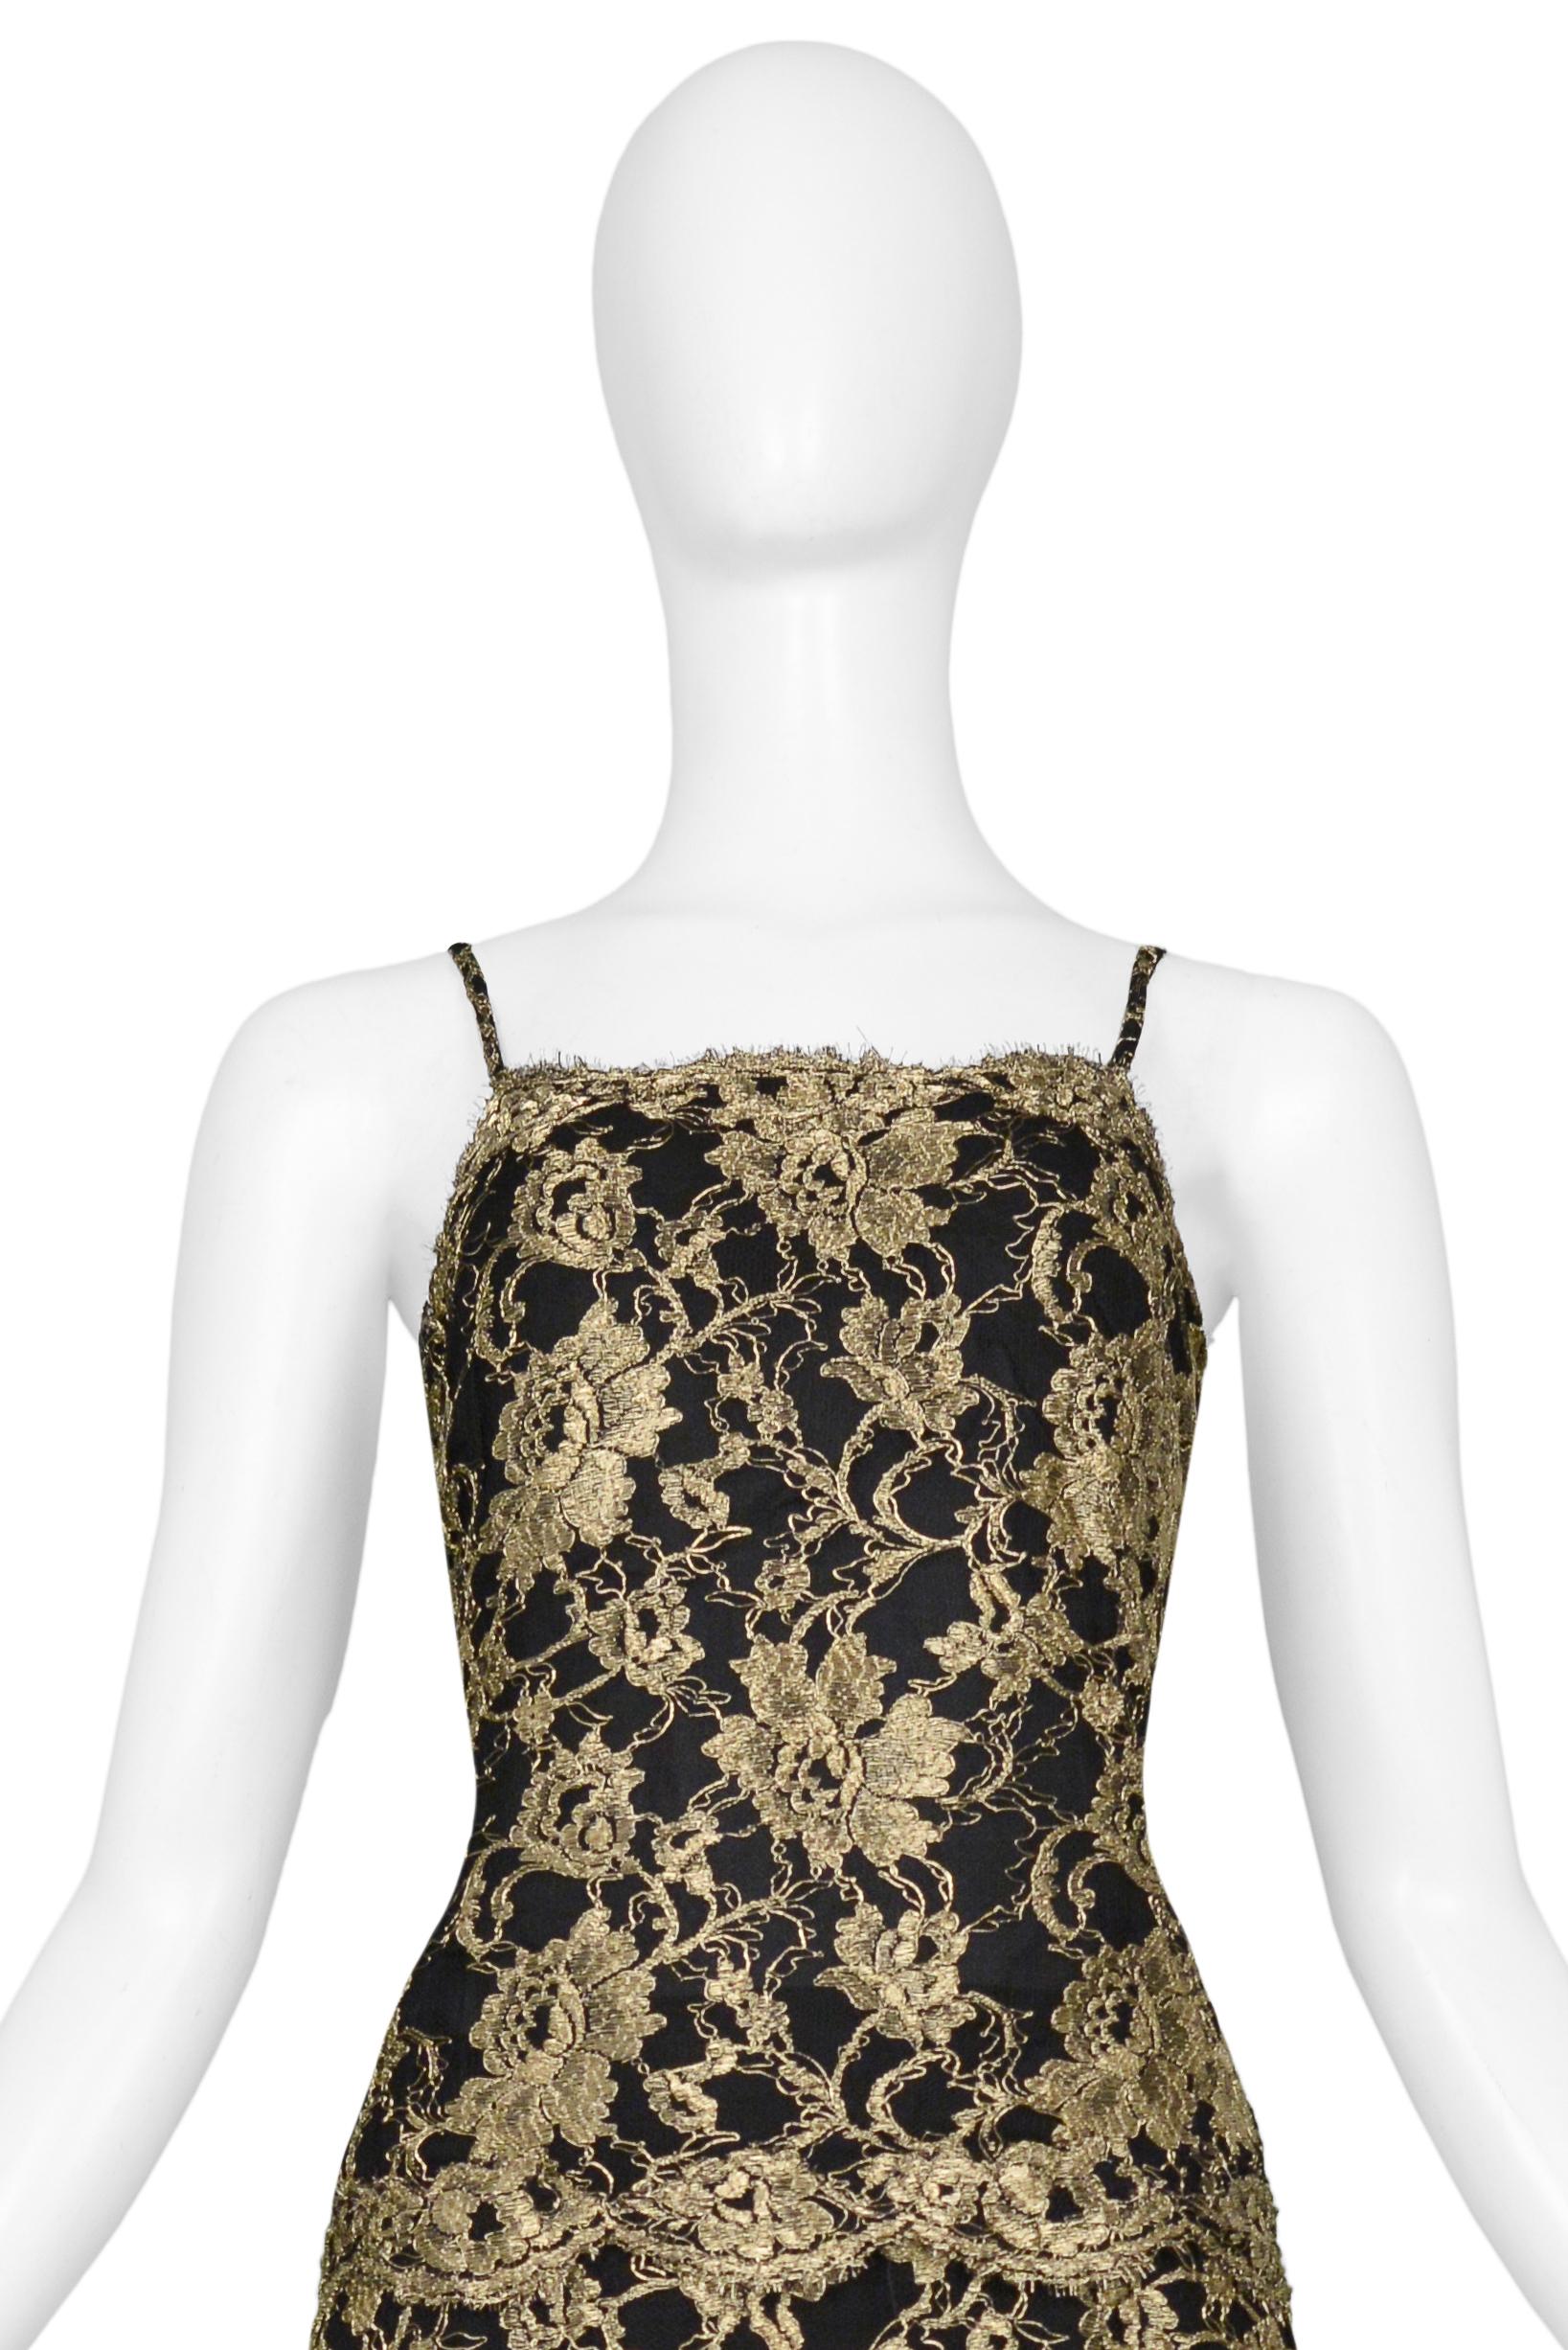 Women's Chanel By Karl Lagerfeld Gold & Black Lace Evening Gown 1986